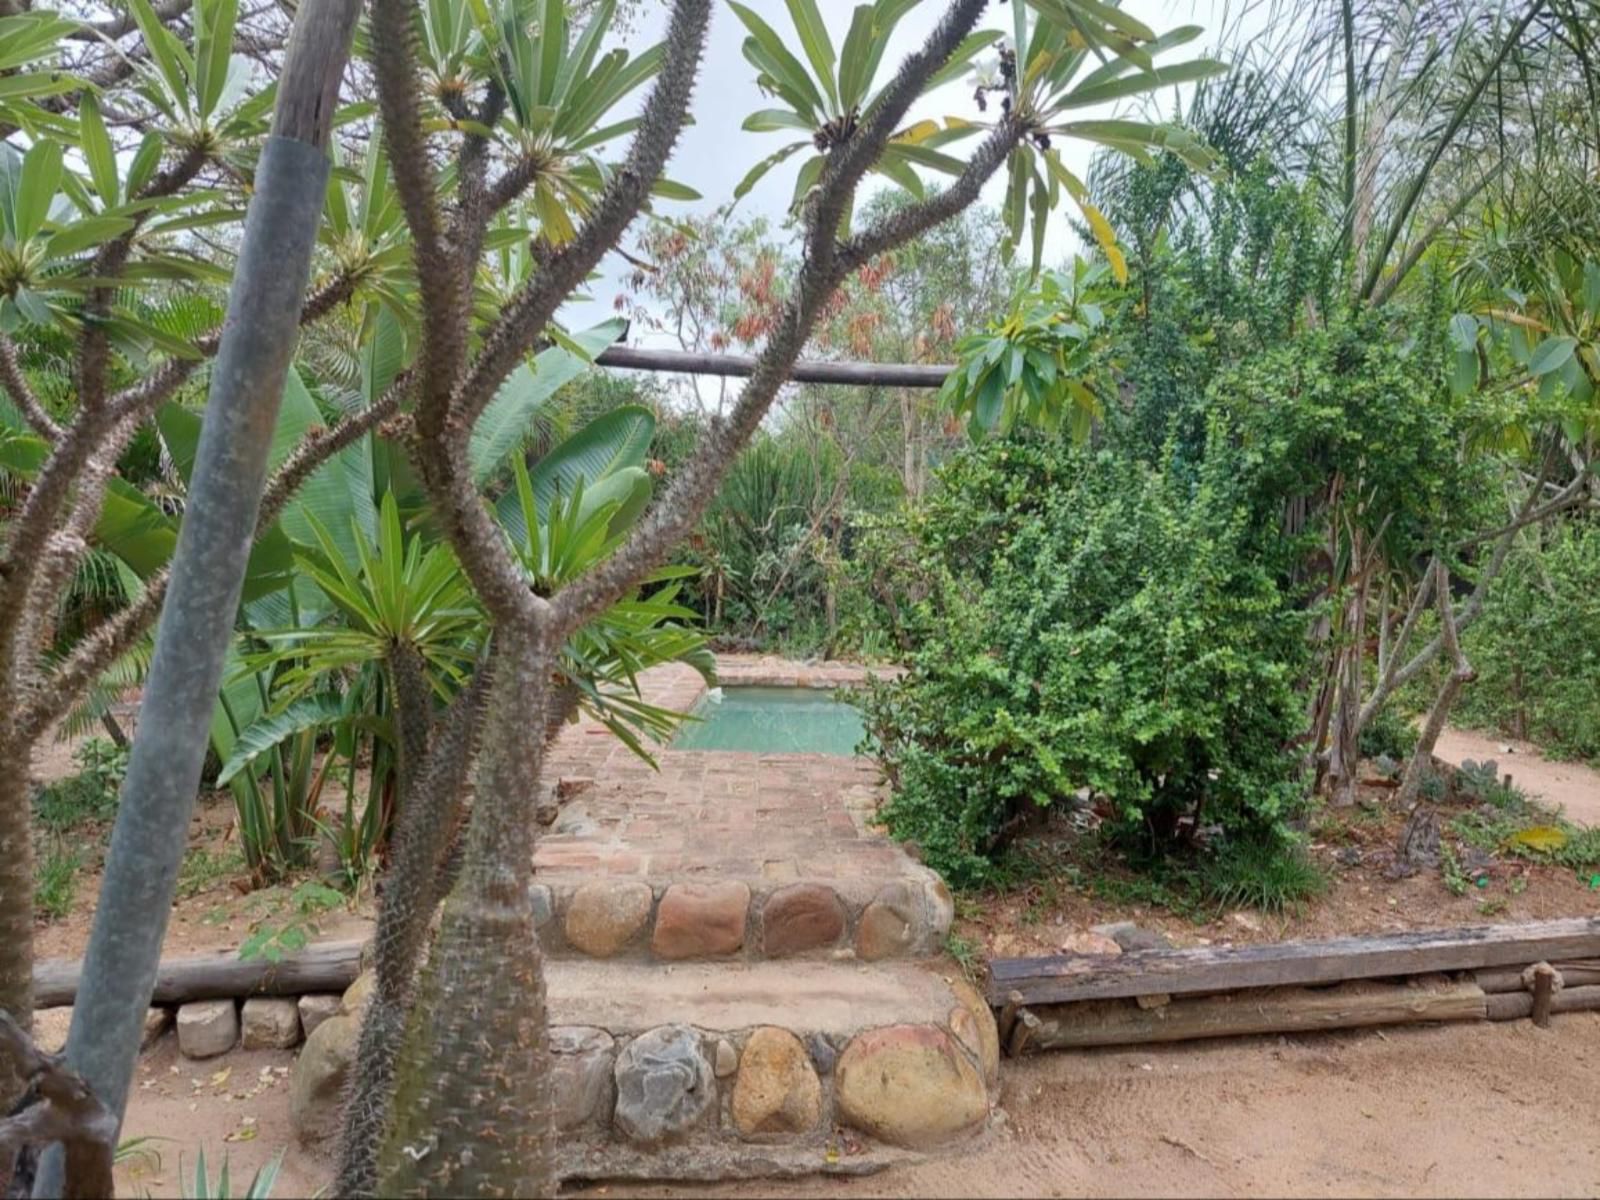 African Sky Bush Camp Amanda Limpopo Province South Africa Palm Tree, Plant, Nature, Wood, Reptile, Animal, Garden